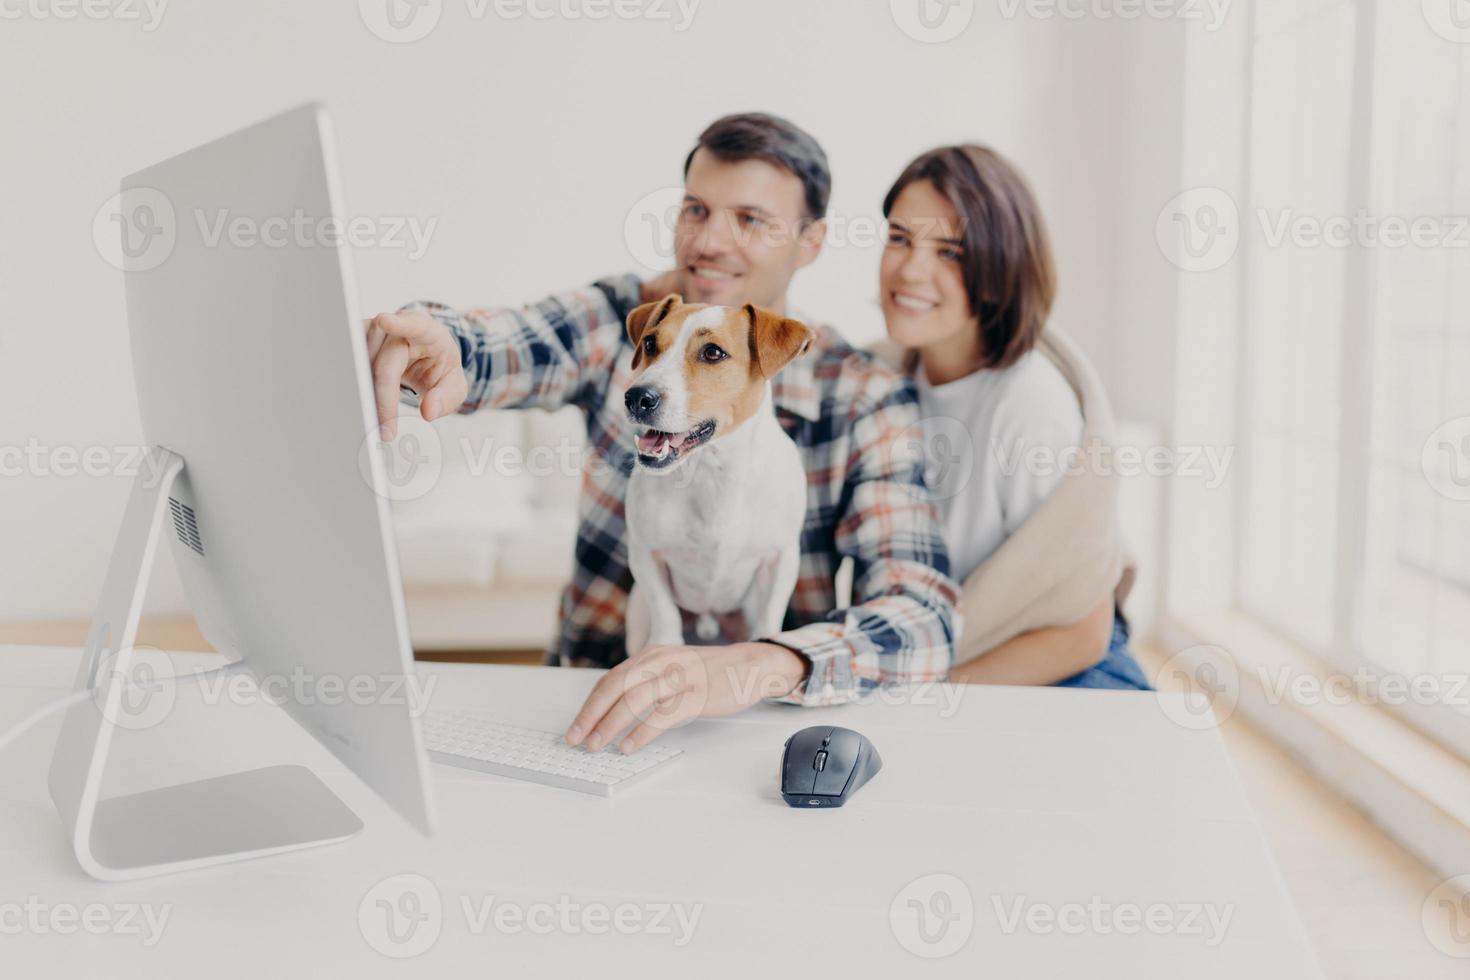 Pleased young woman and man watch computer content, point into screen of monitor, watch funny video, focus on dog, pose at white desktop, search movie on website, develop new startup project photo